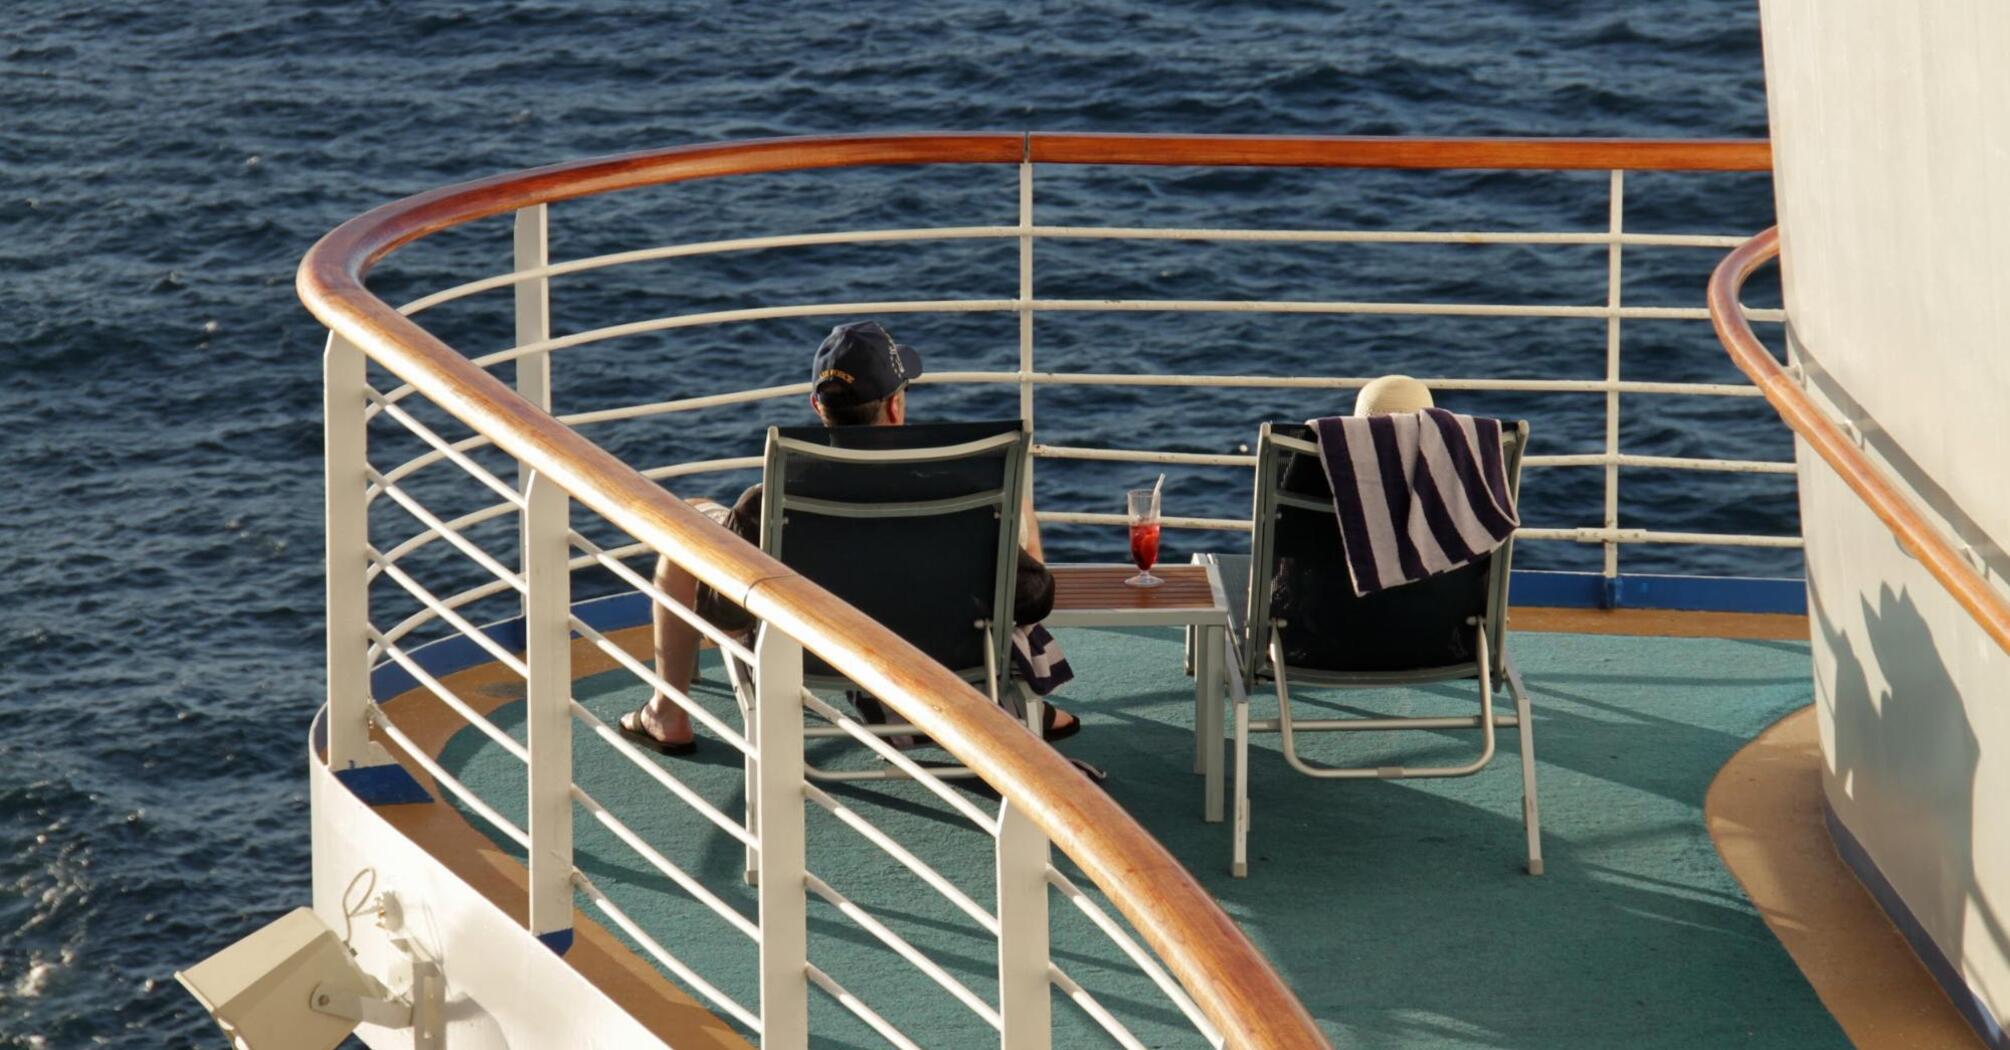 Guests enjoying tranquility on board the cruise ship